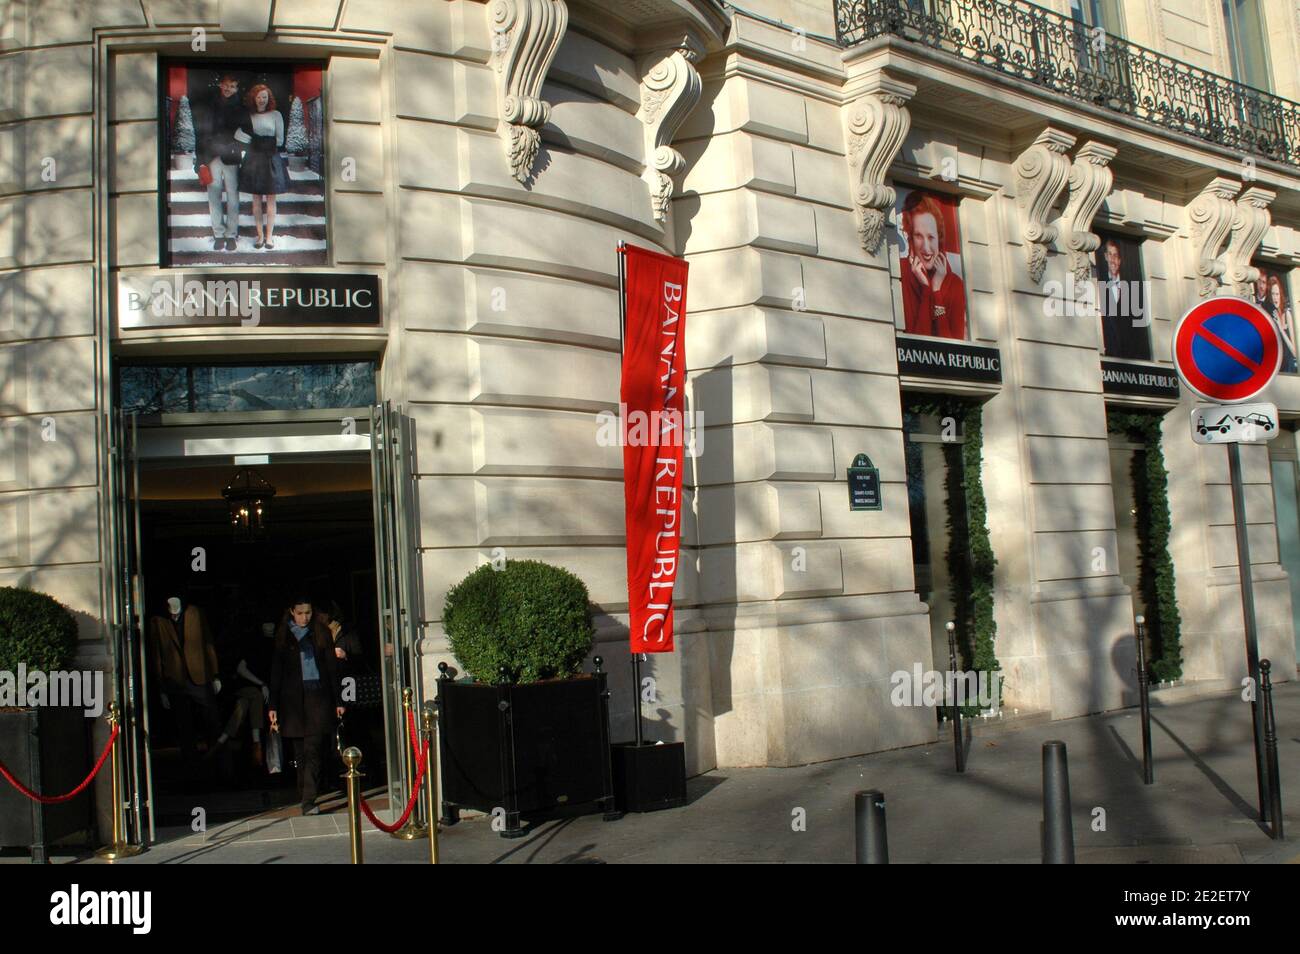 Banana Republic', a division of San Francisco-based Gap Inc., has opened  its first ever flagship store in France, located on Avenue des  Champs-Elysees in Paris, France on December 11, 2011. Photo by